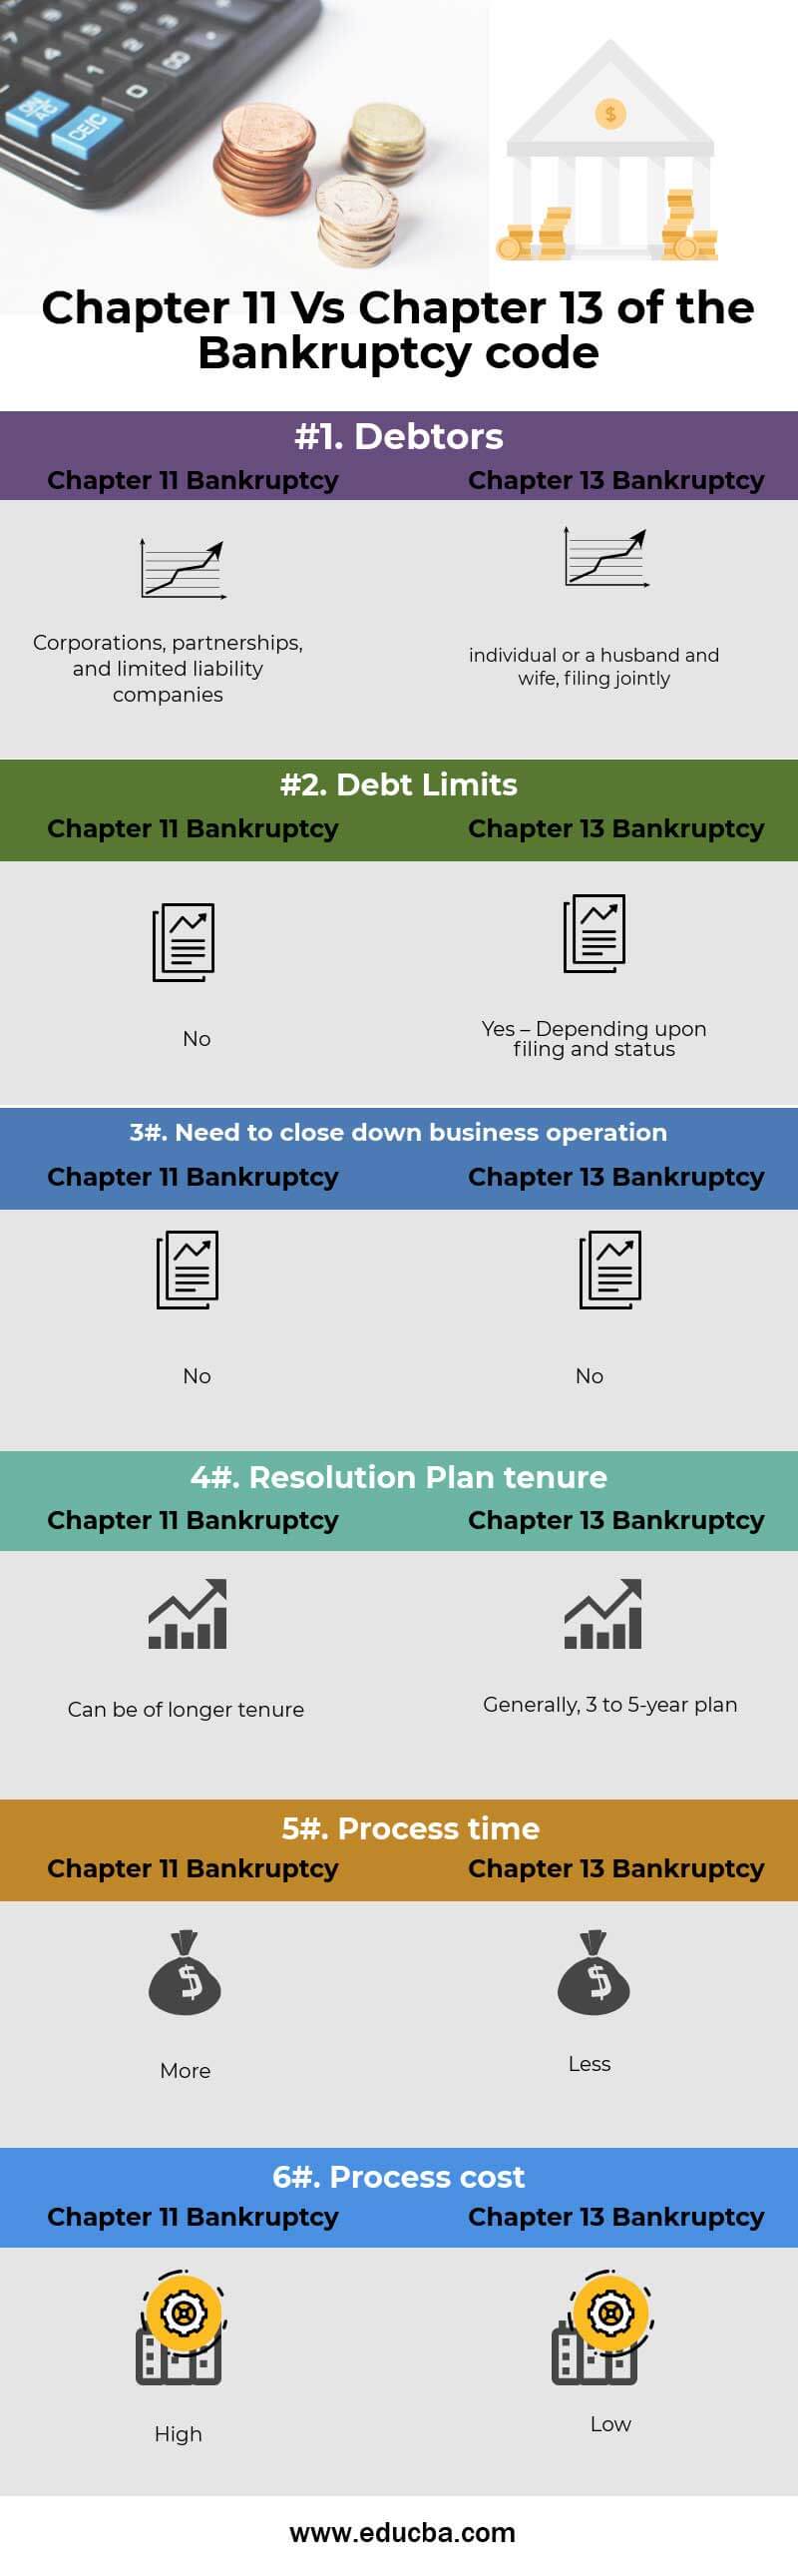 Chapter 11 Vs Chapter 13 of the bankruptcy code